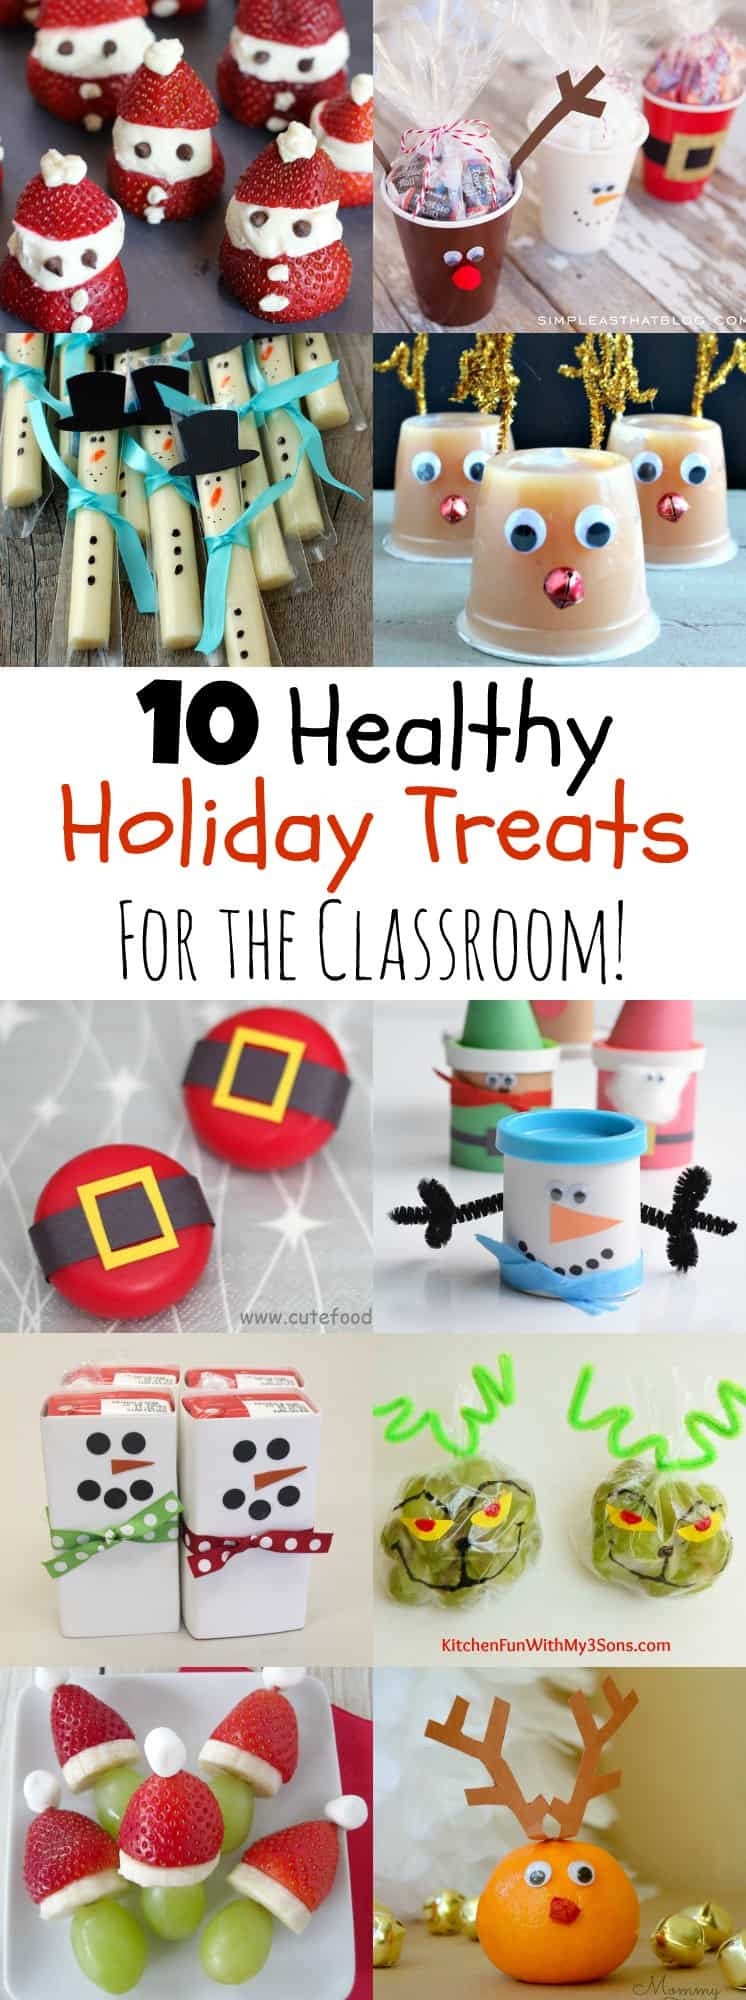 Class Christmas Party Ideas
 10 Healthy Holiday Treats for the Classroom MOMables